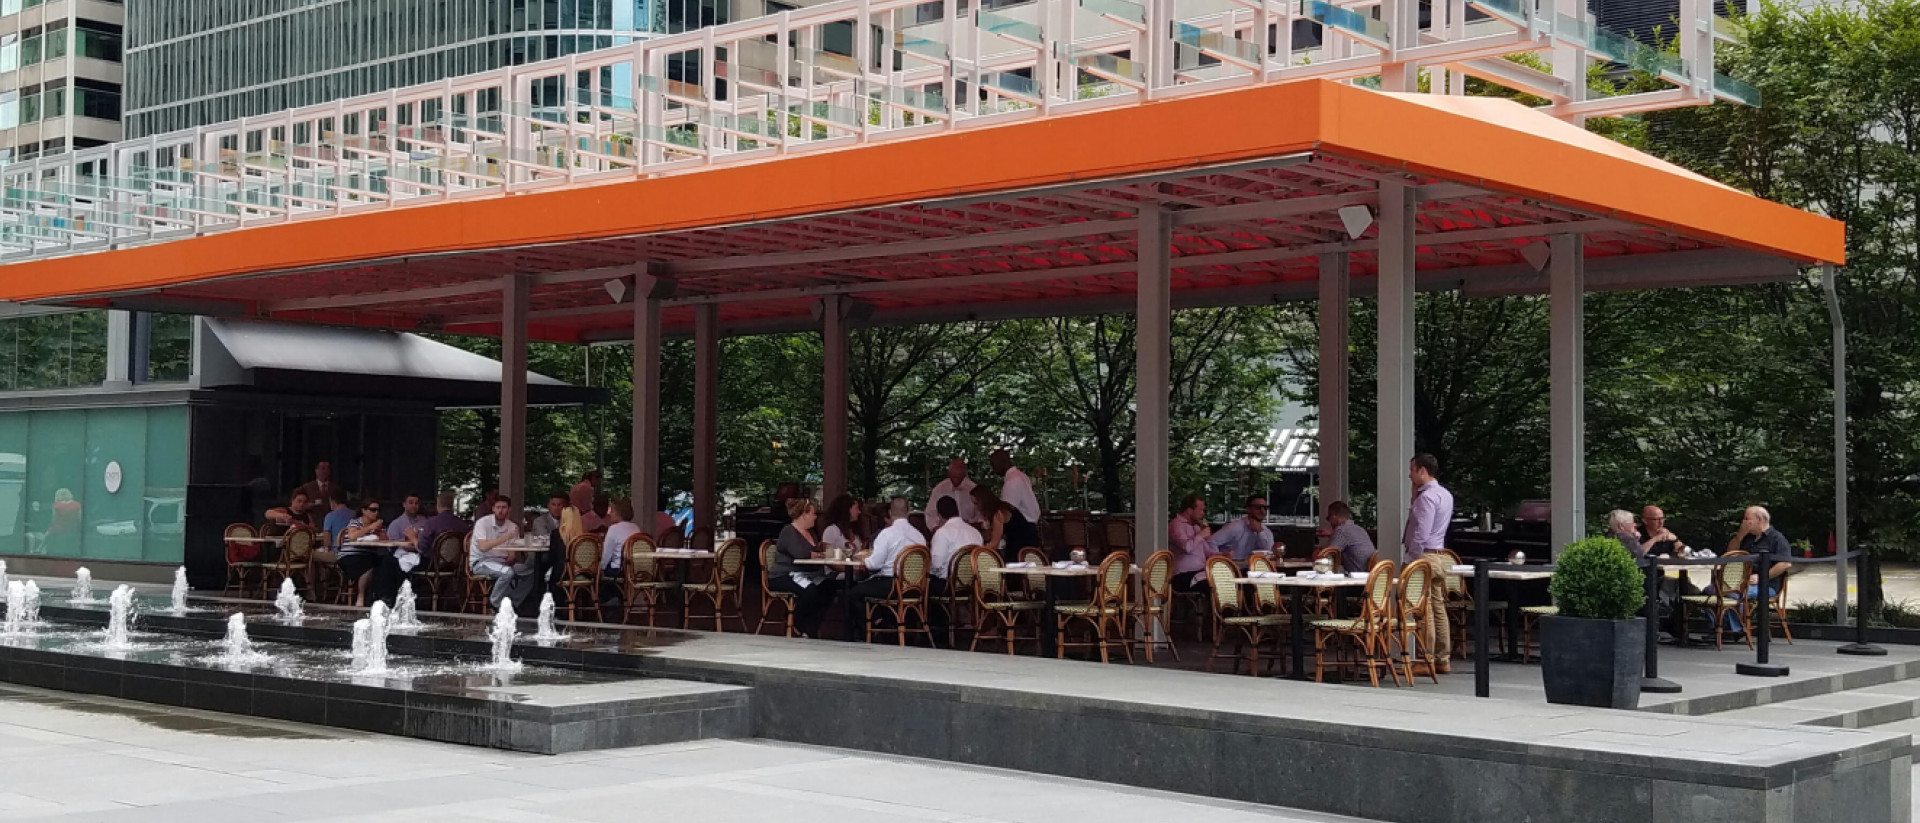 Outdoor restaurant patio with an orange awning